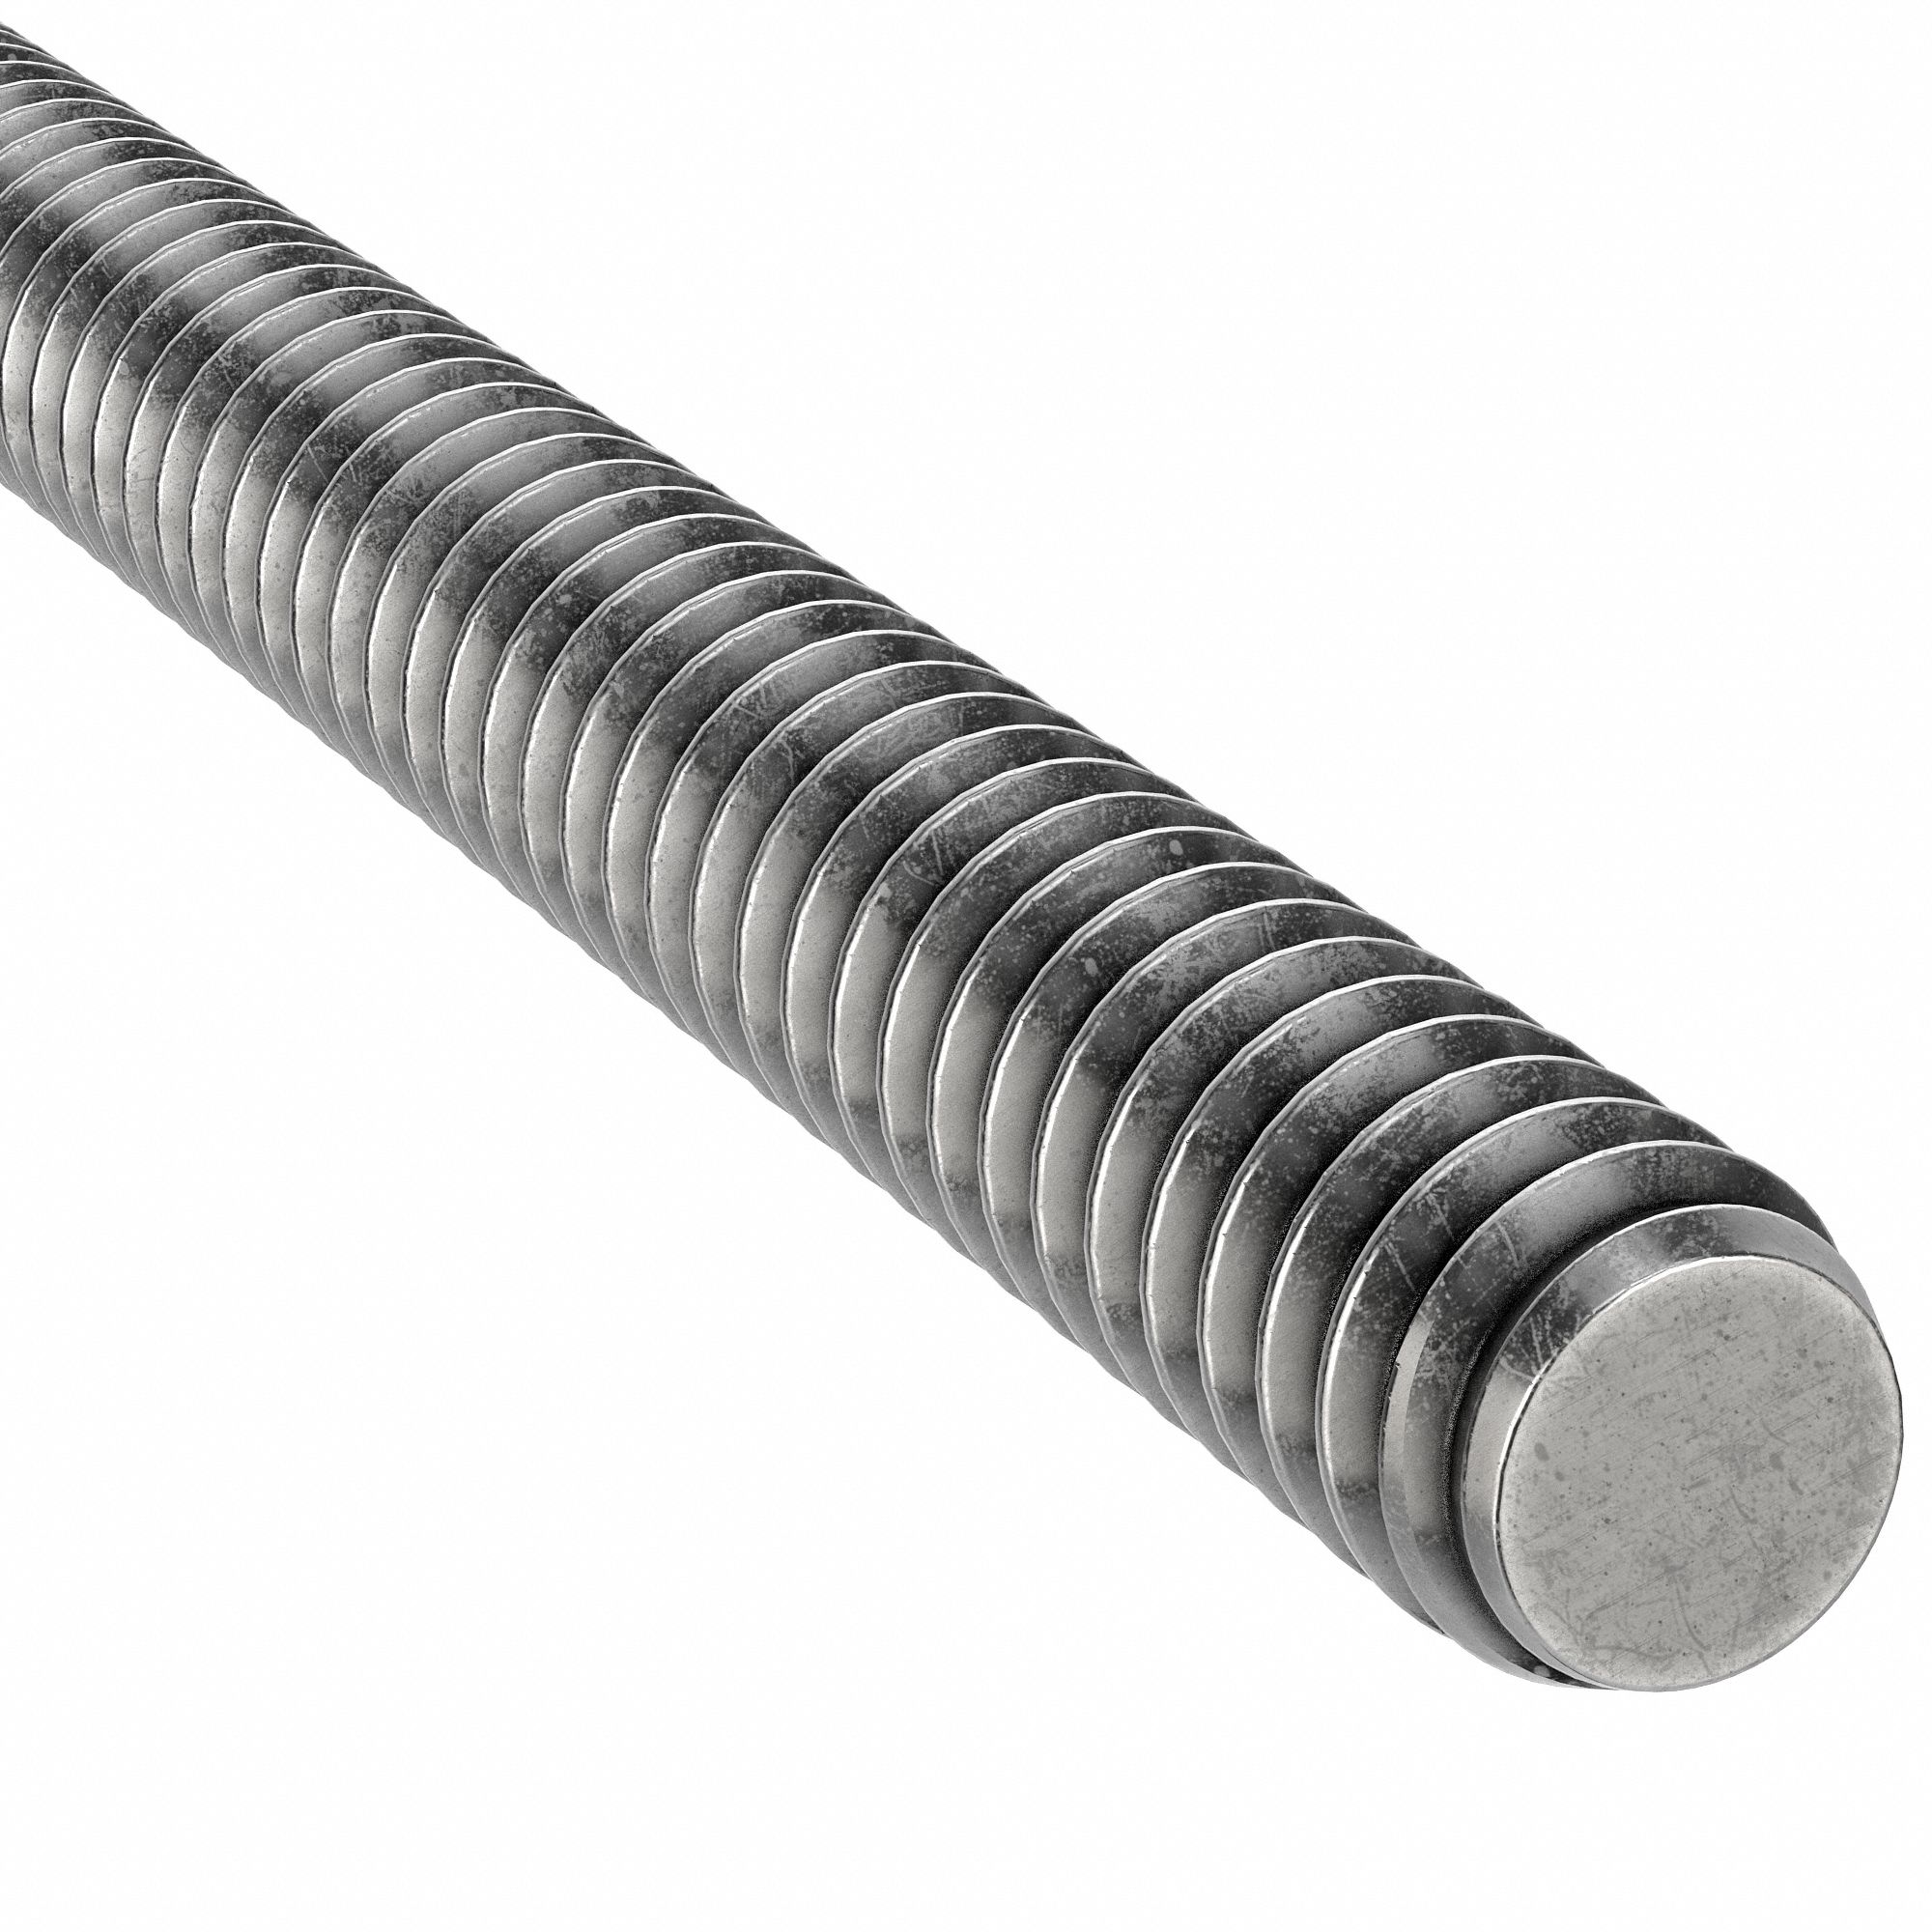 Small Parts 45535 Threaded Rod 3/4-16-6 Stainless 304 